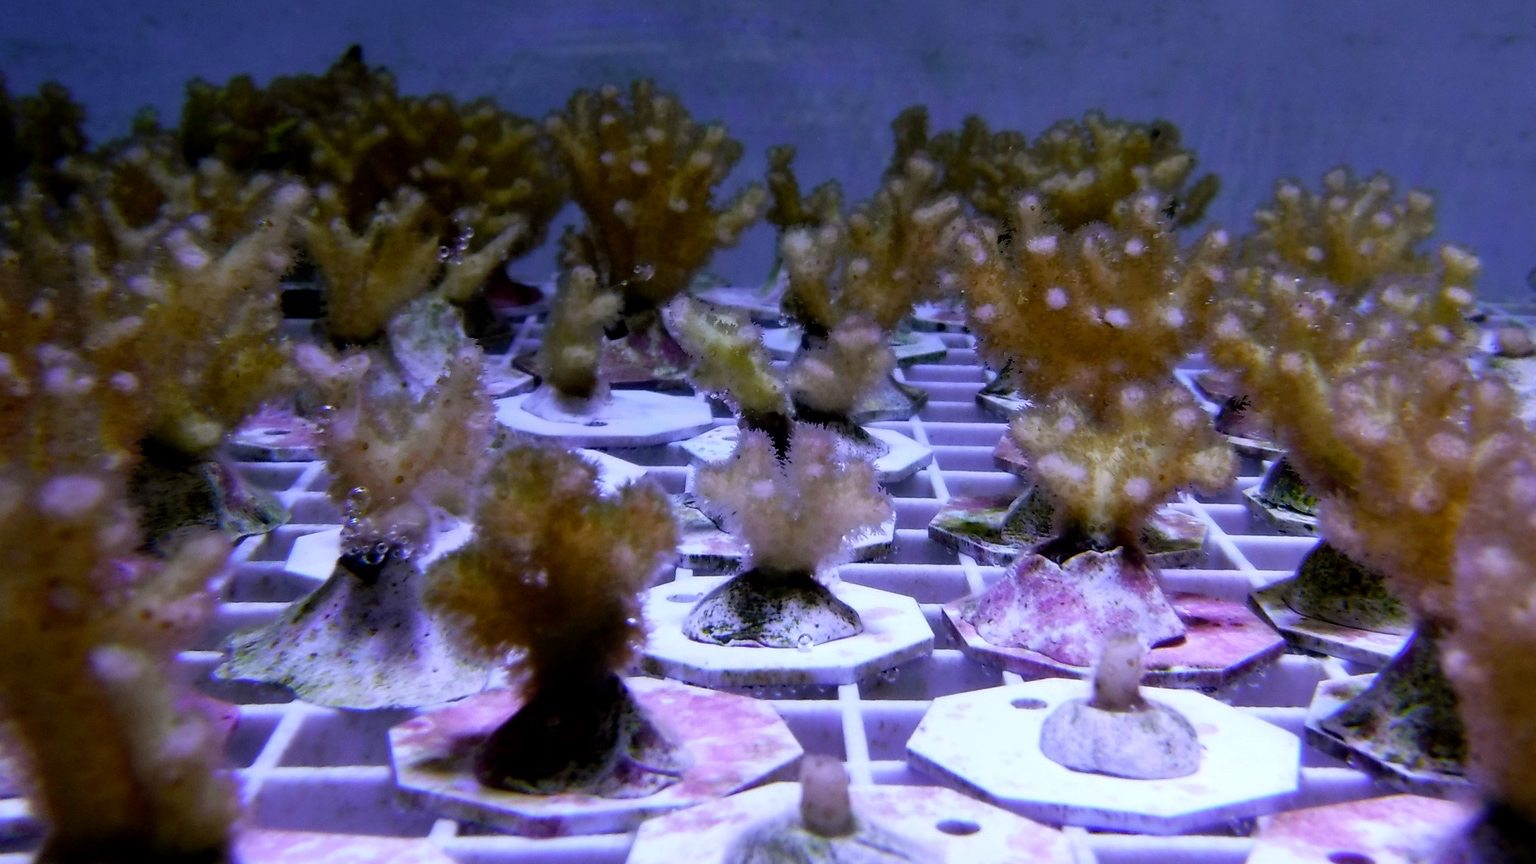 New Study Finds Unique Immunity Genes in One Widespread Coral Species